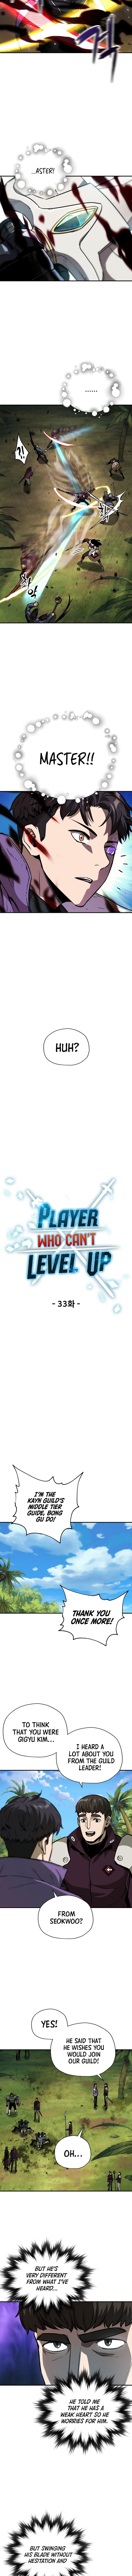 Player Who Can’t Level Up image